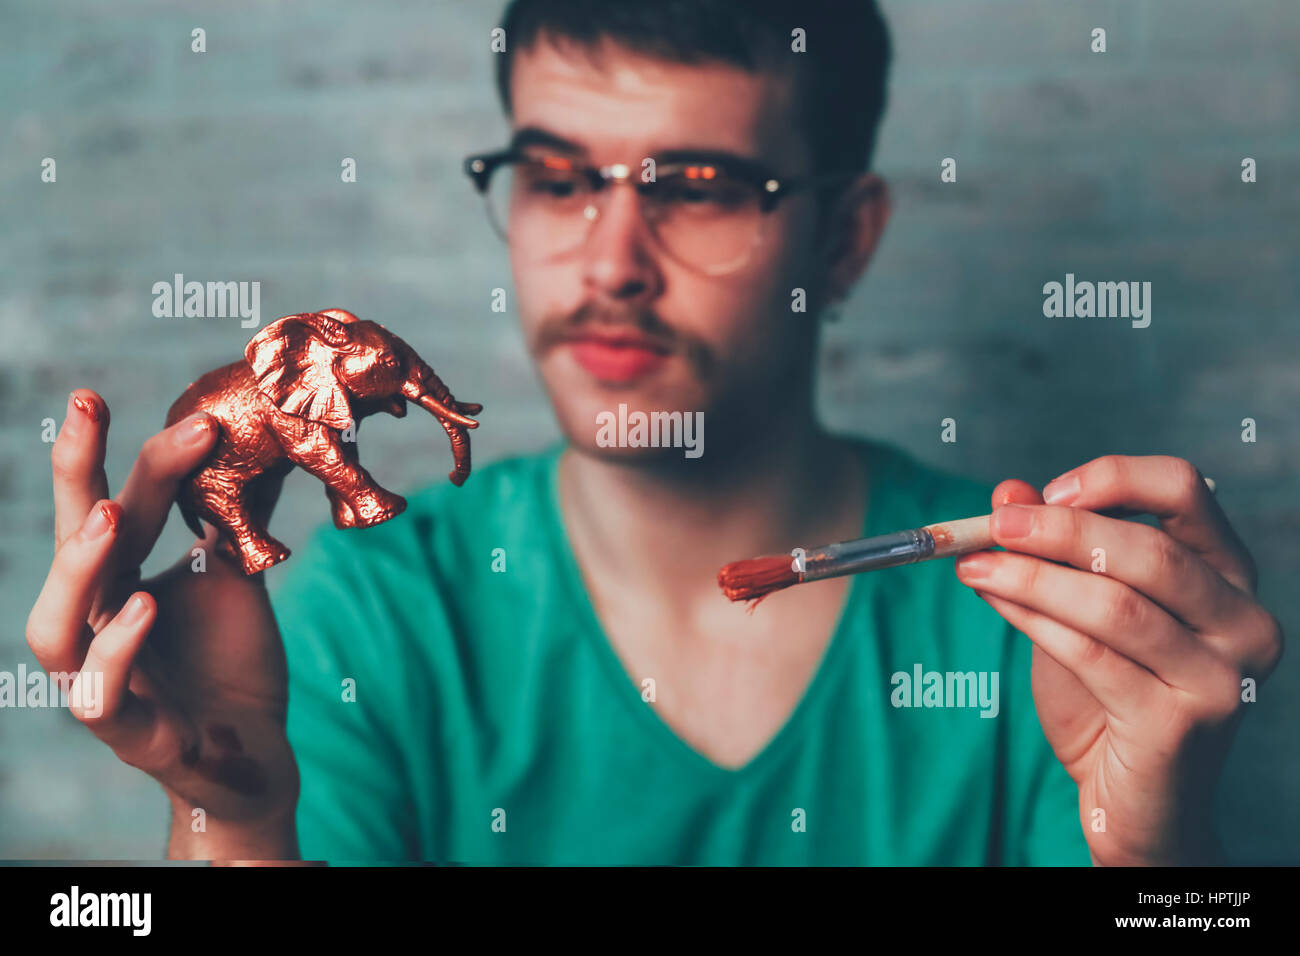 Young man painting plastic elephant figure with copper paint Stock Photo